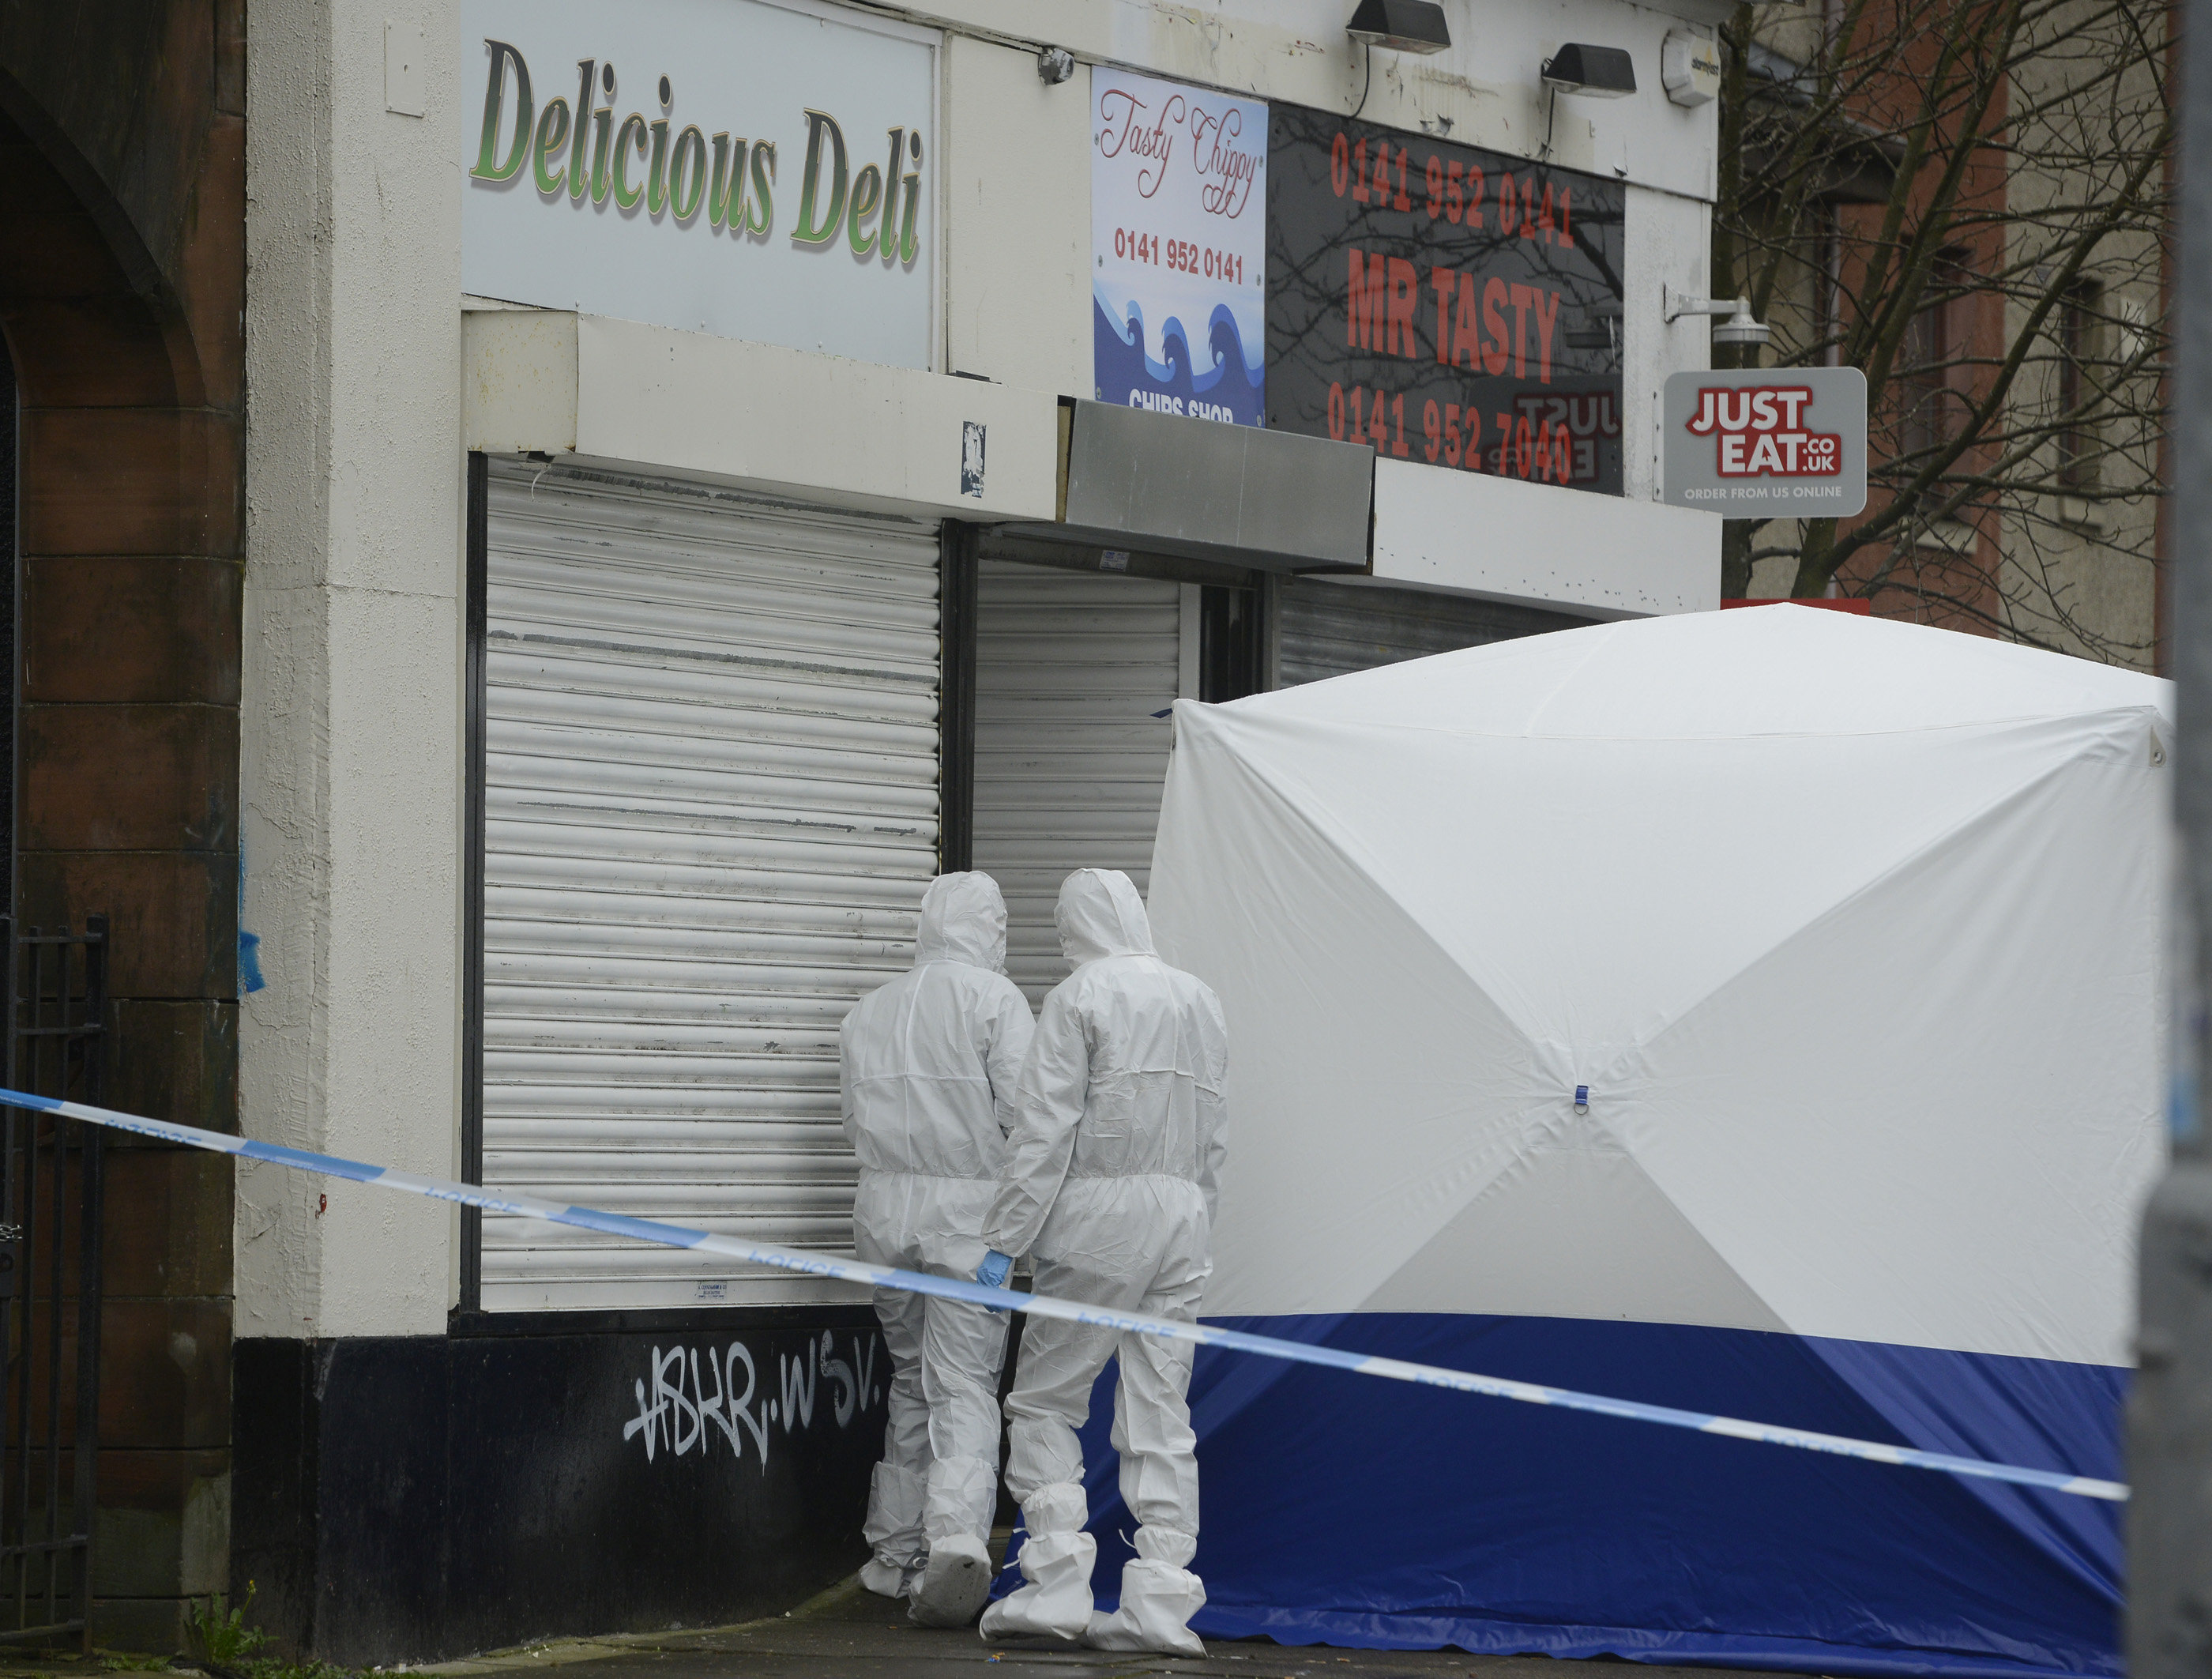  Forensics teams outside Delicious Deli after Paige was found dead.